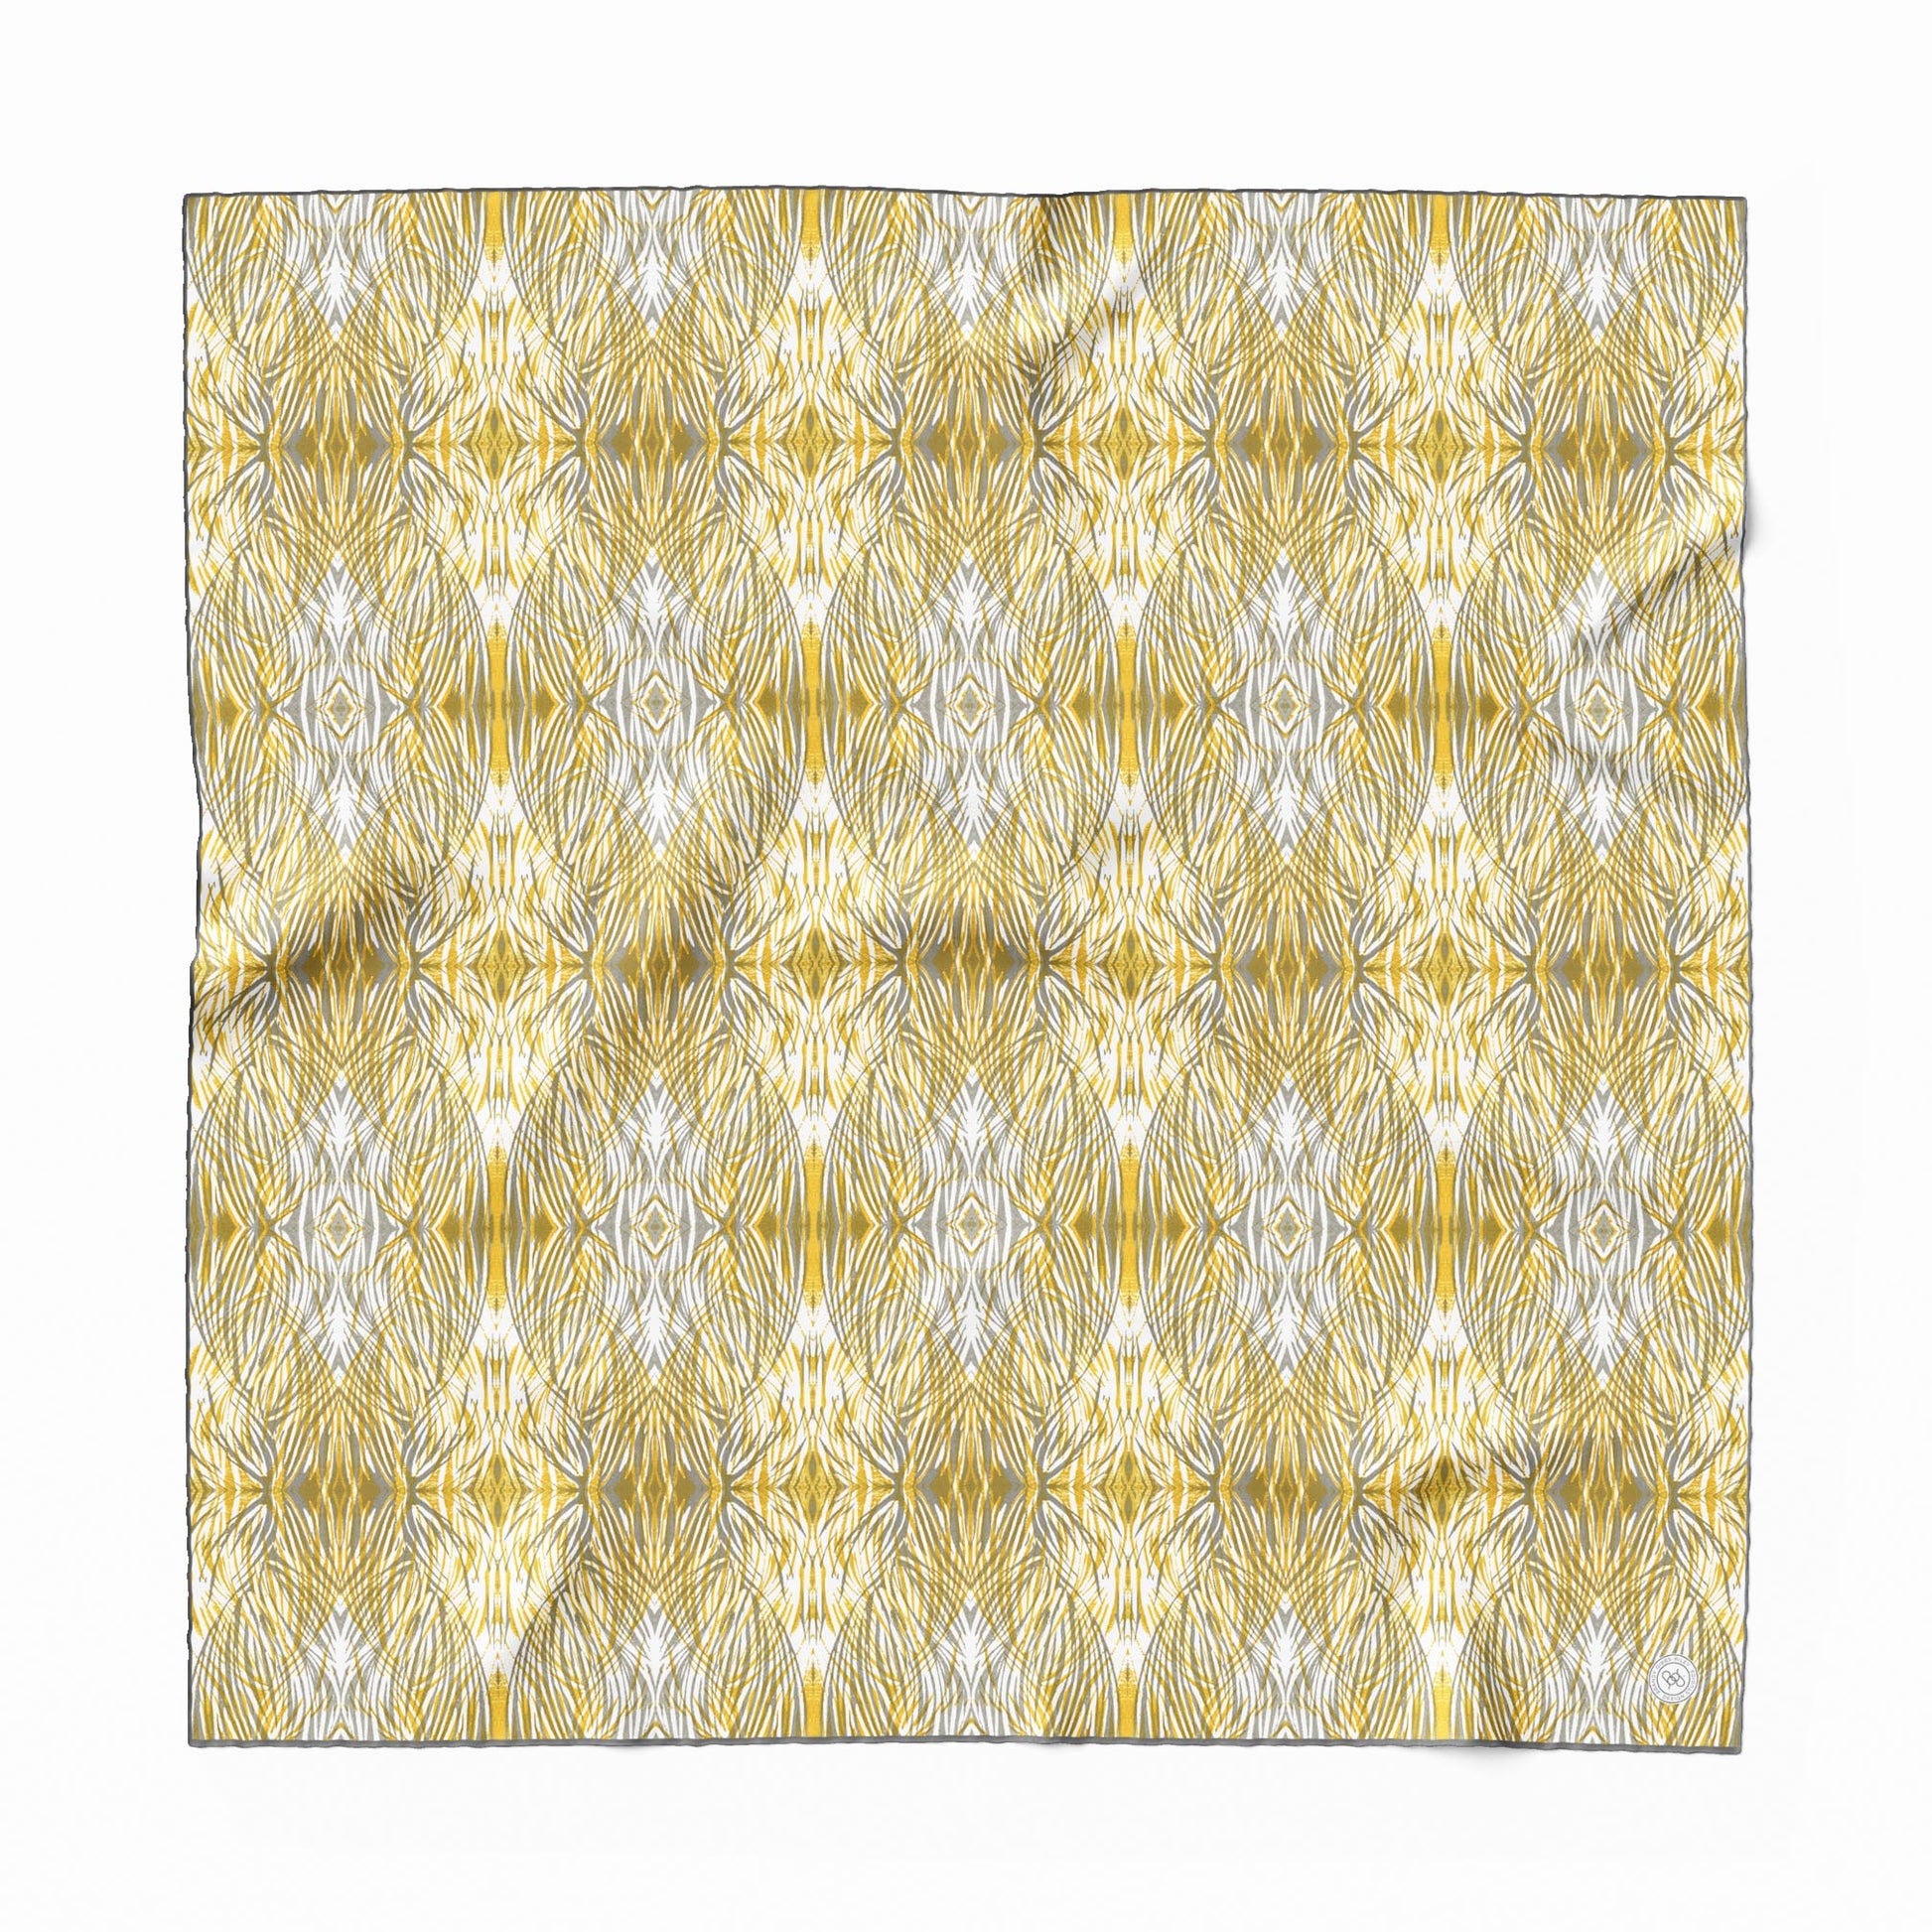 Silk scarf featuring a linocut print pattern in gold and gray.